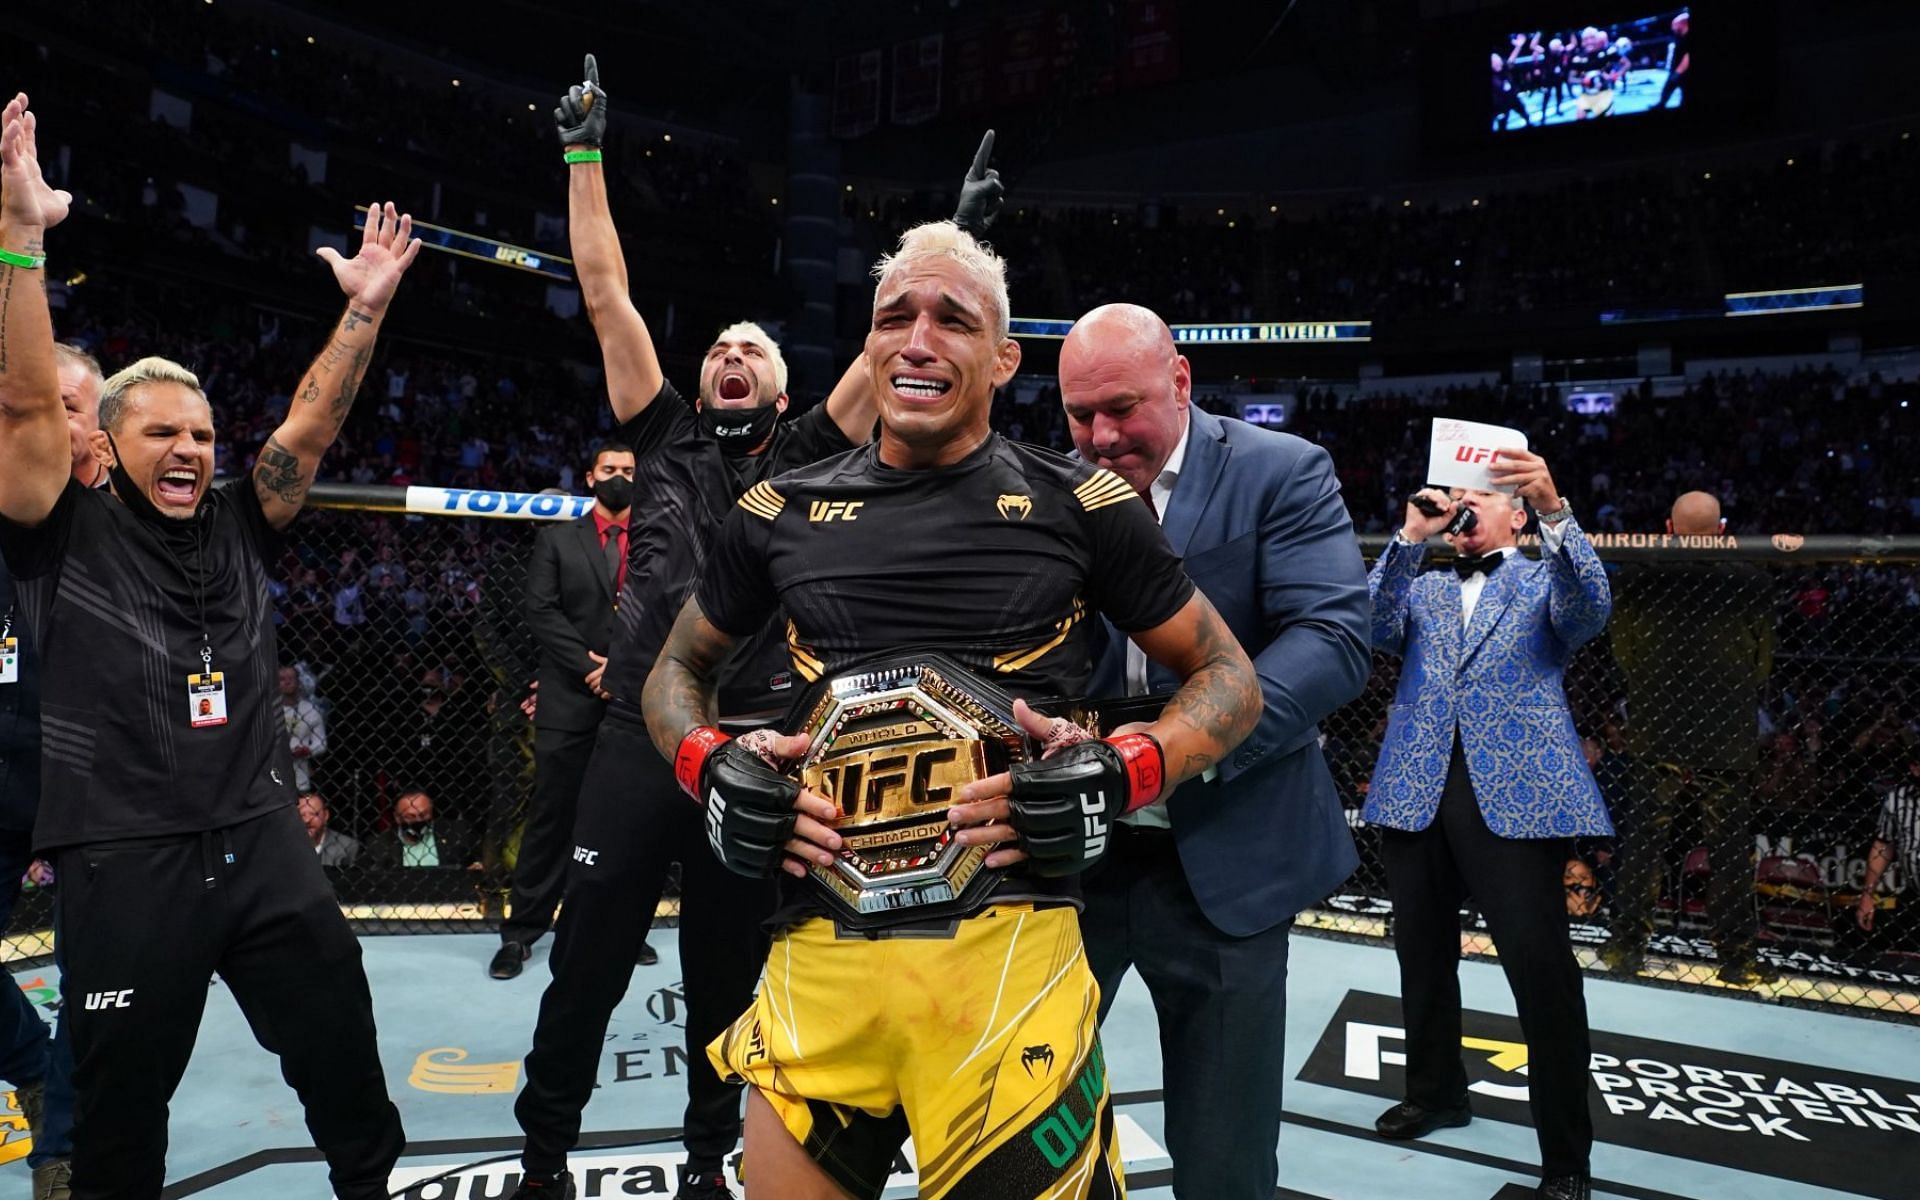 Reigning lightweight champ Charles Oliveira took a bumpy road to the top of the UFC